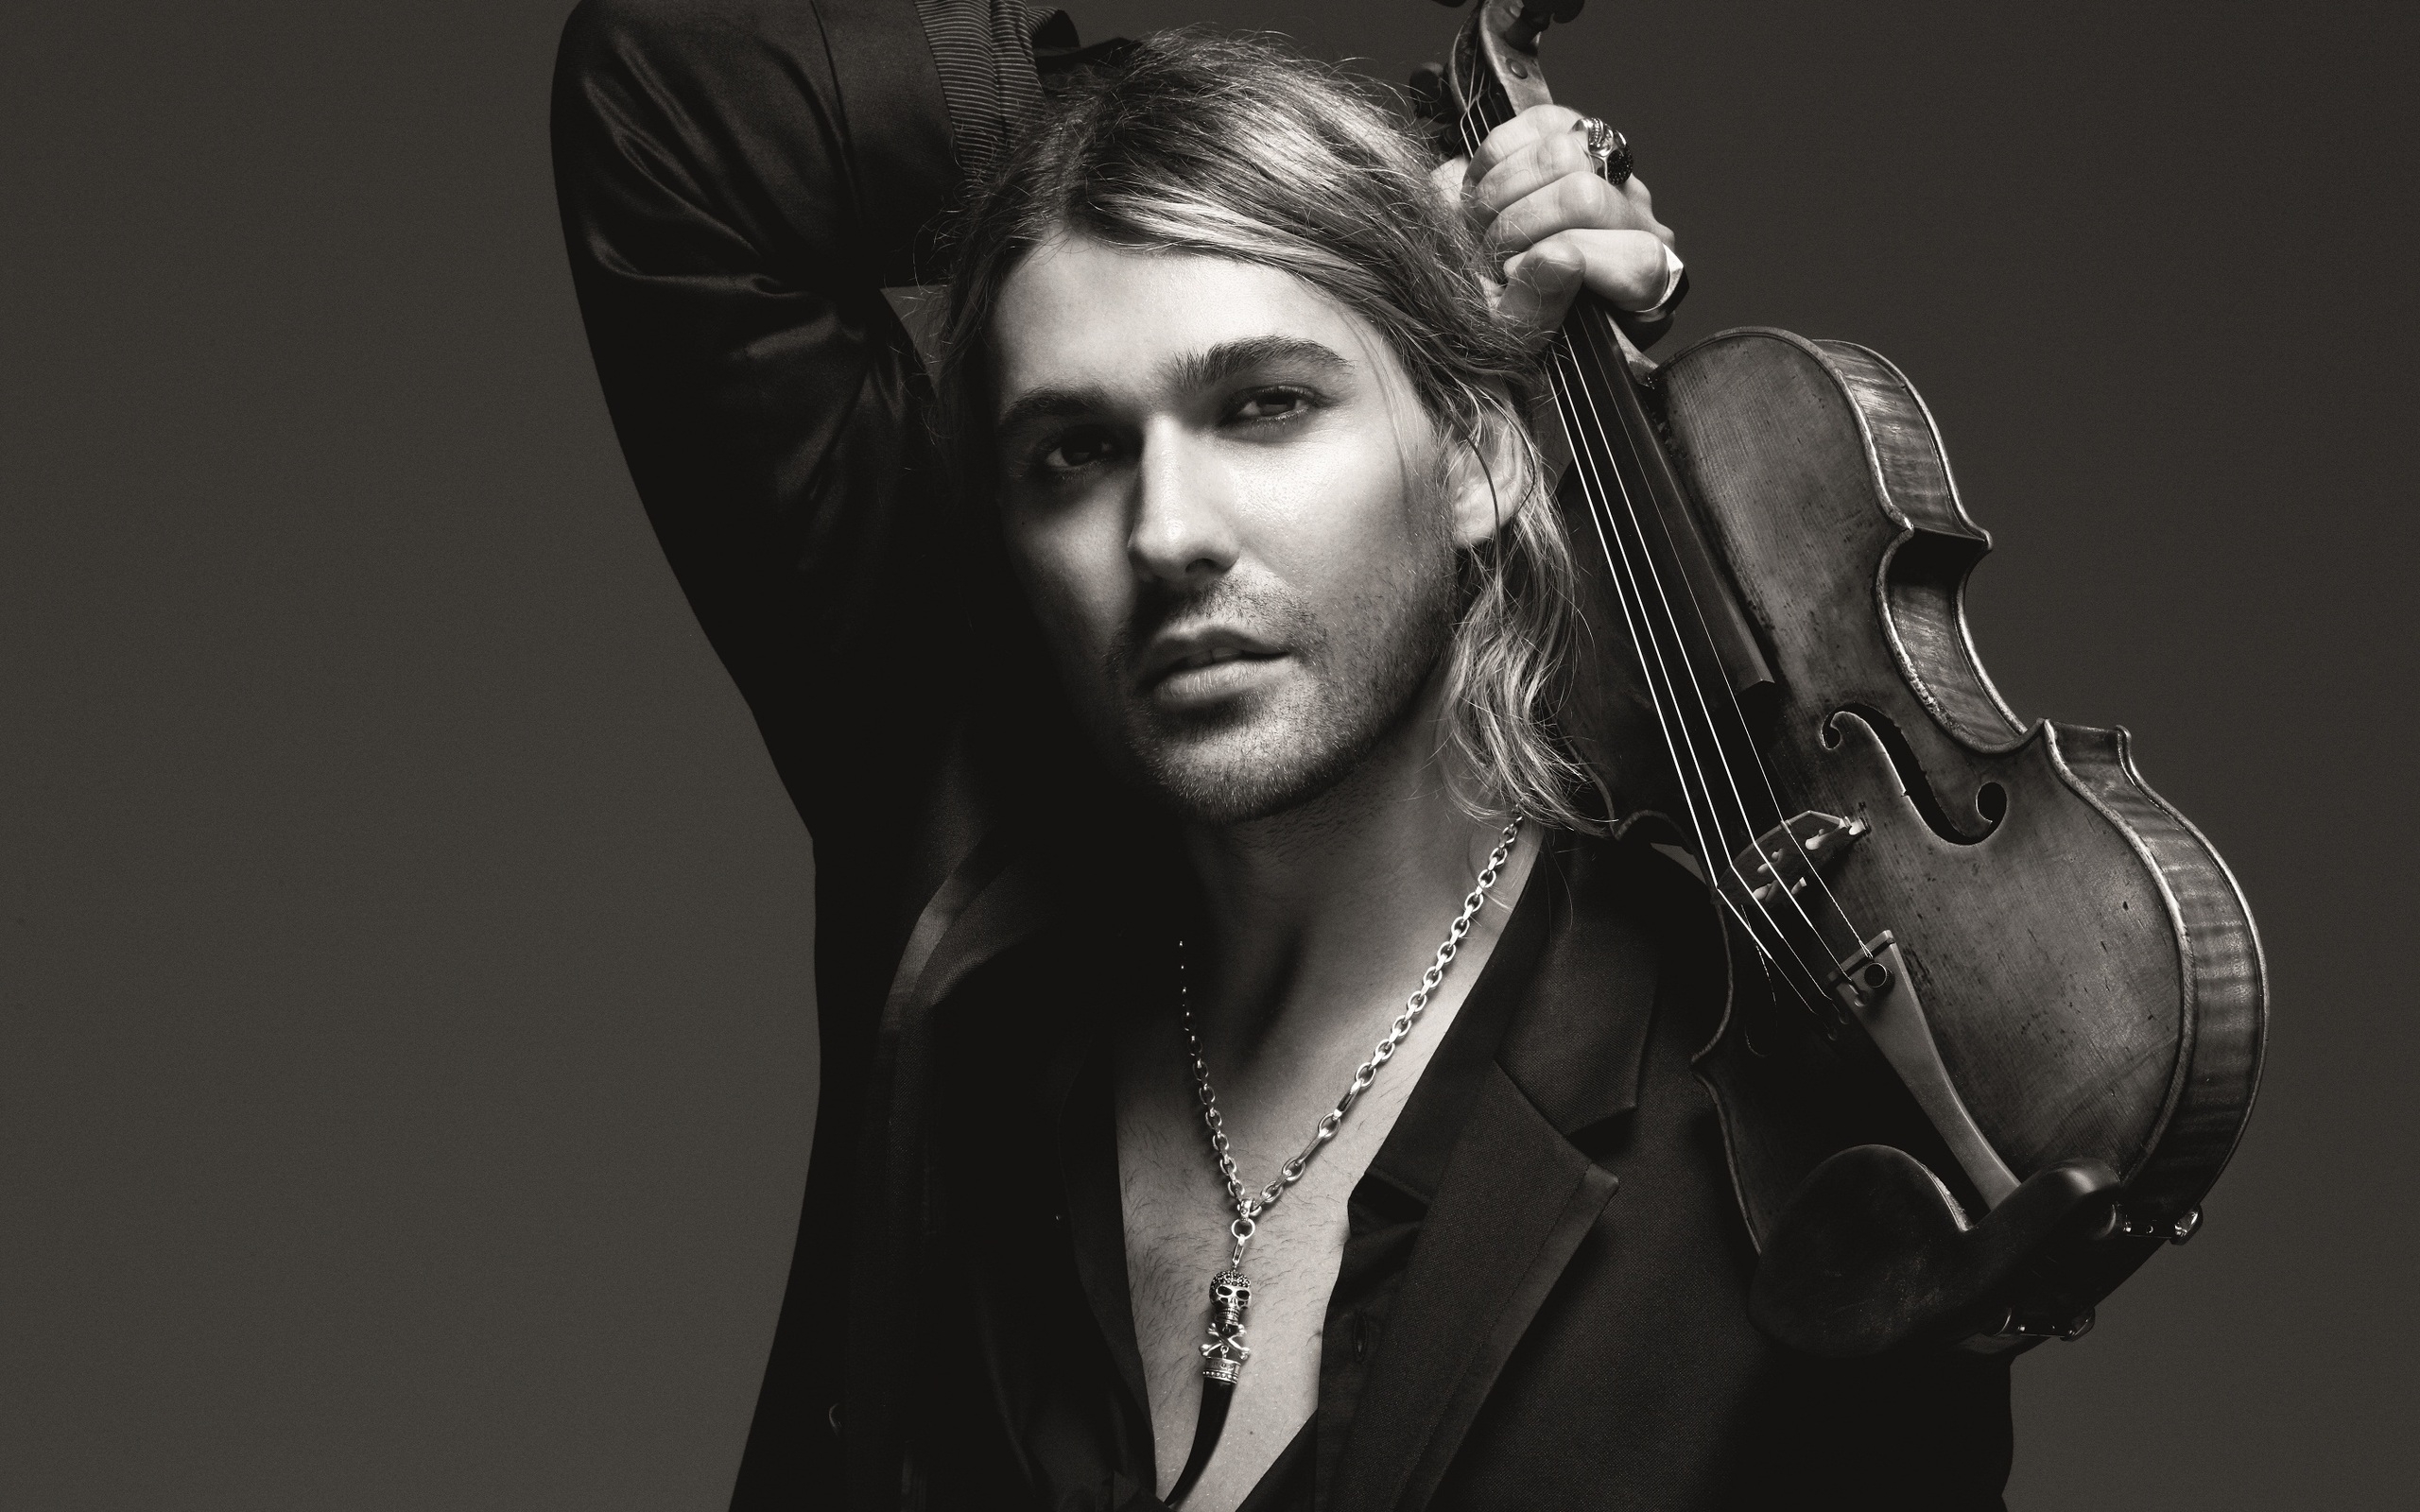 David Garrett wallpapers and images - wallpapers, pictures ...